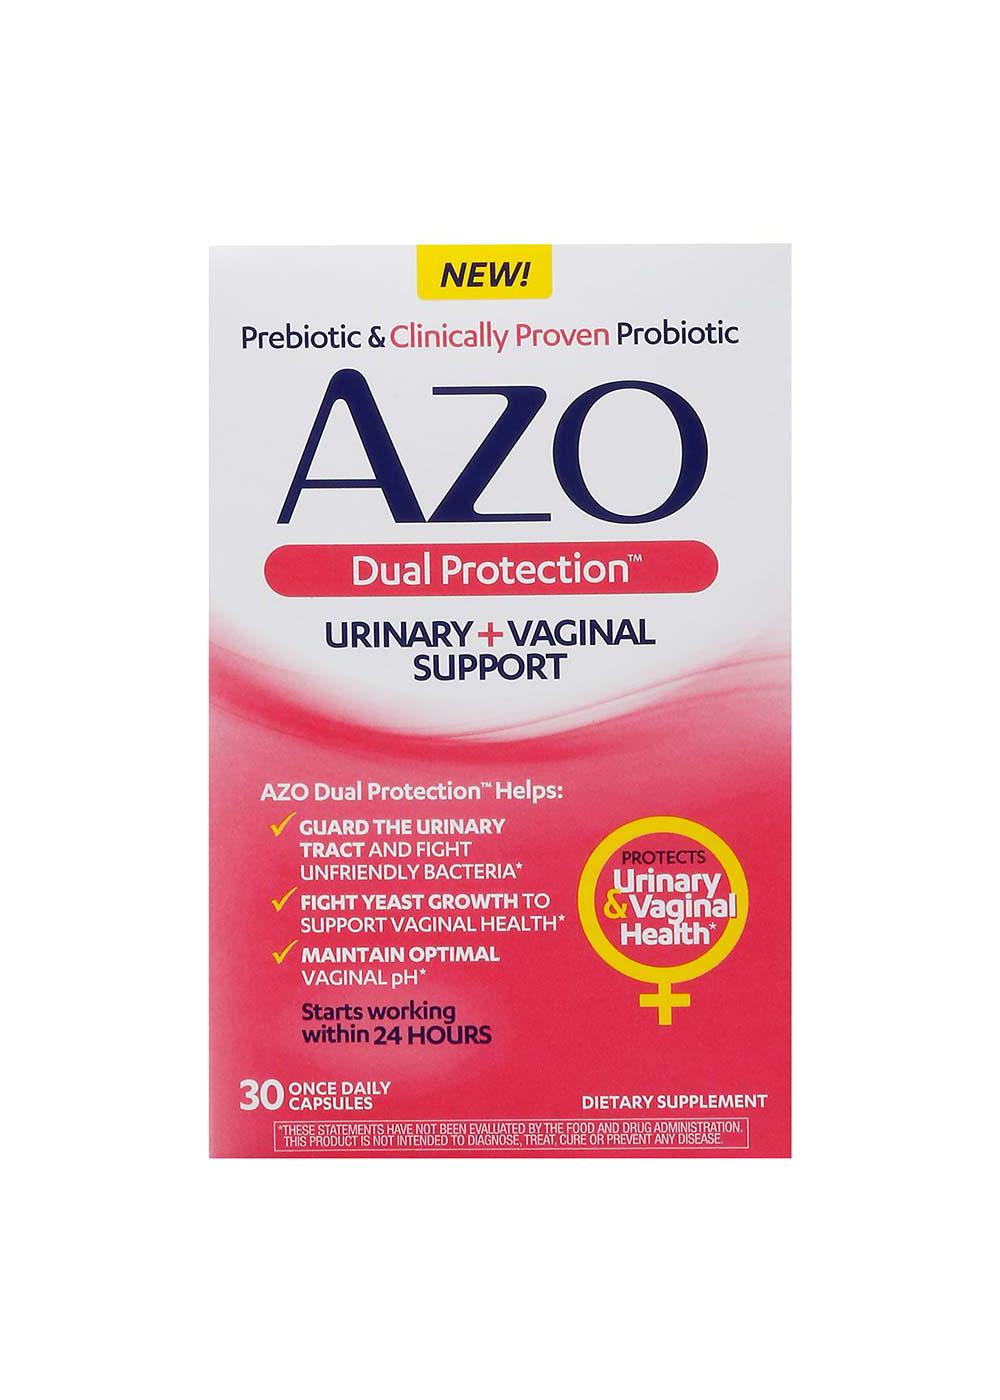 Azo Dual Protection Probiotic; image 1 of 8